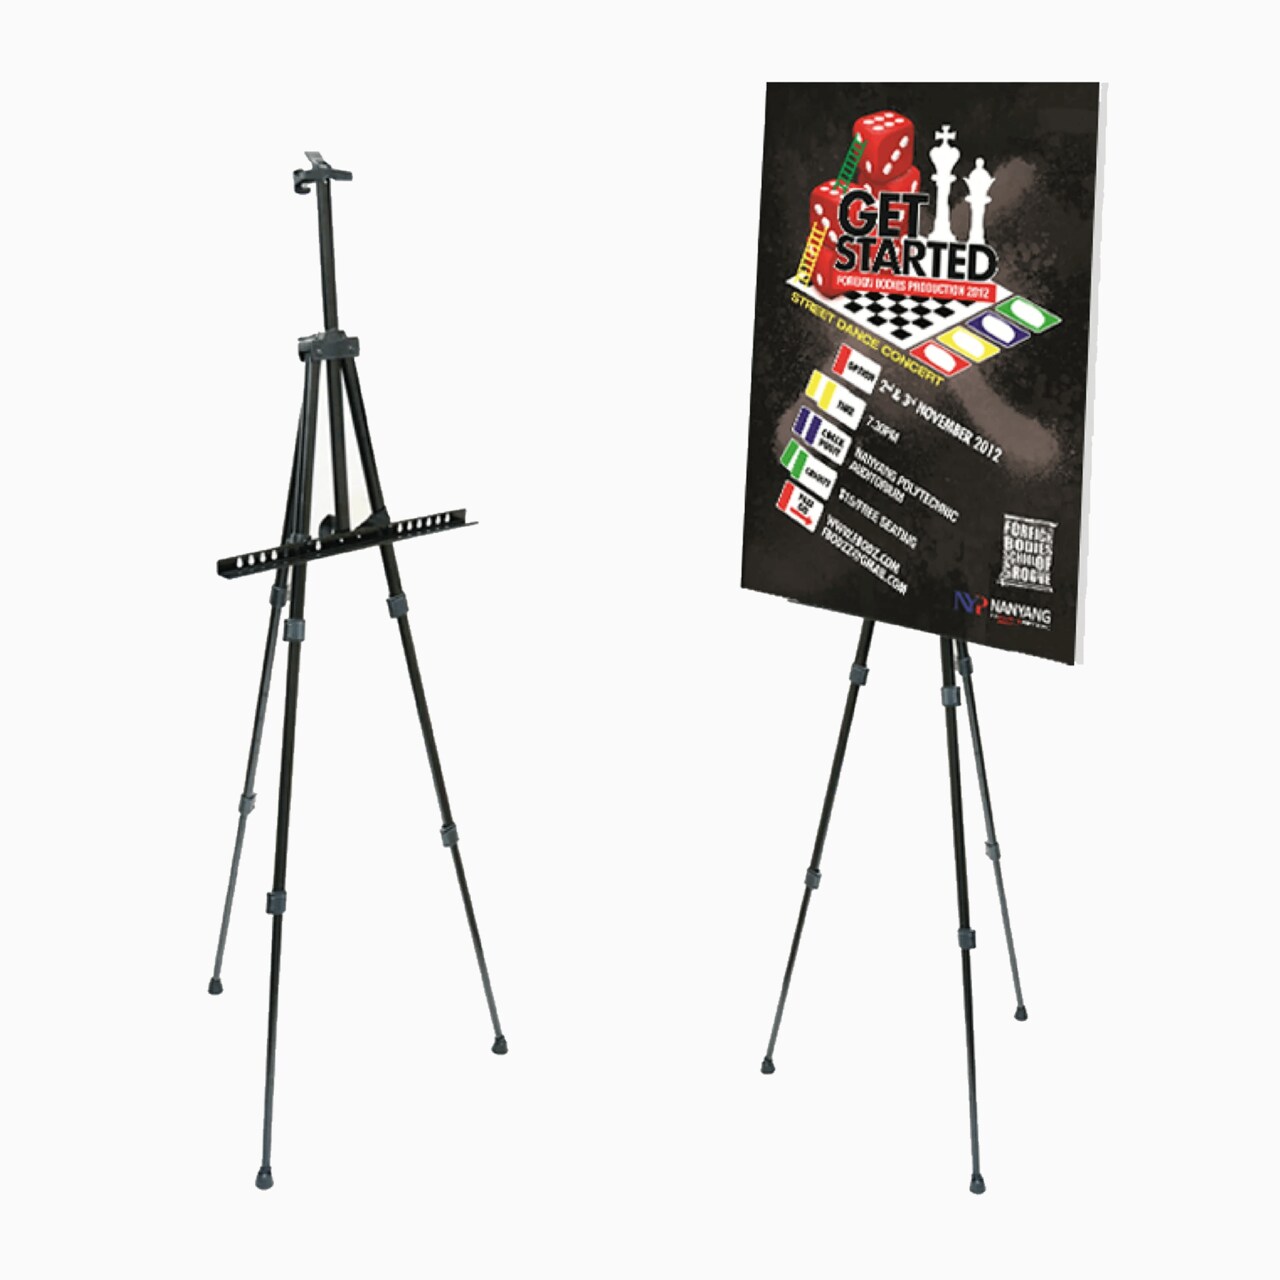 Pintar Art Supply 66” Professional Adjustable Artist Easel Stand with  Travel Carrying Bag, Use as Drawing Easel Stand, or to Display Posters or  Art.